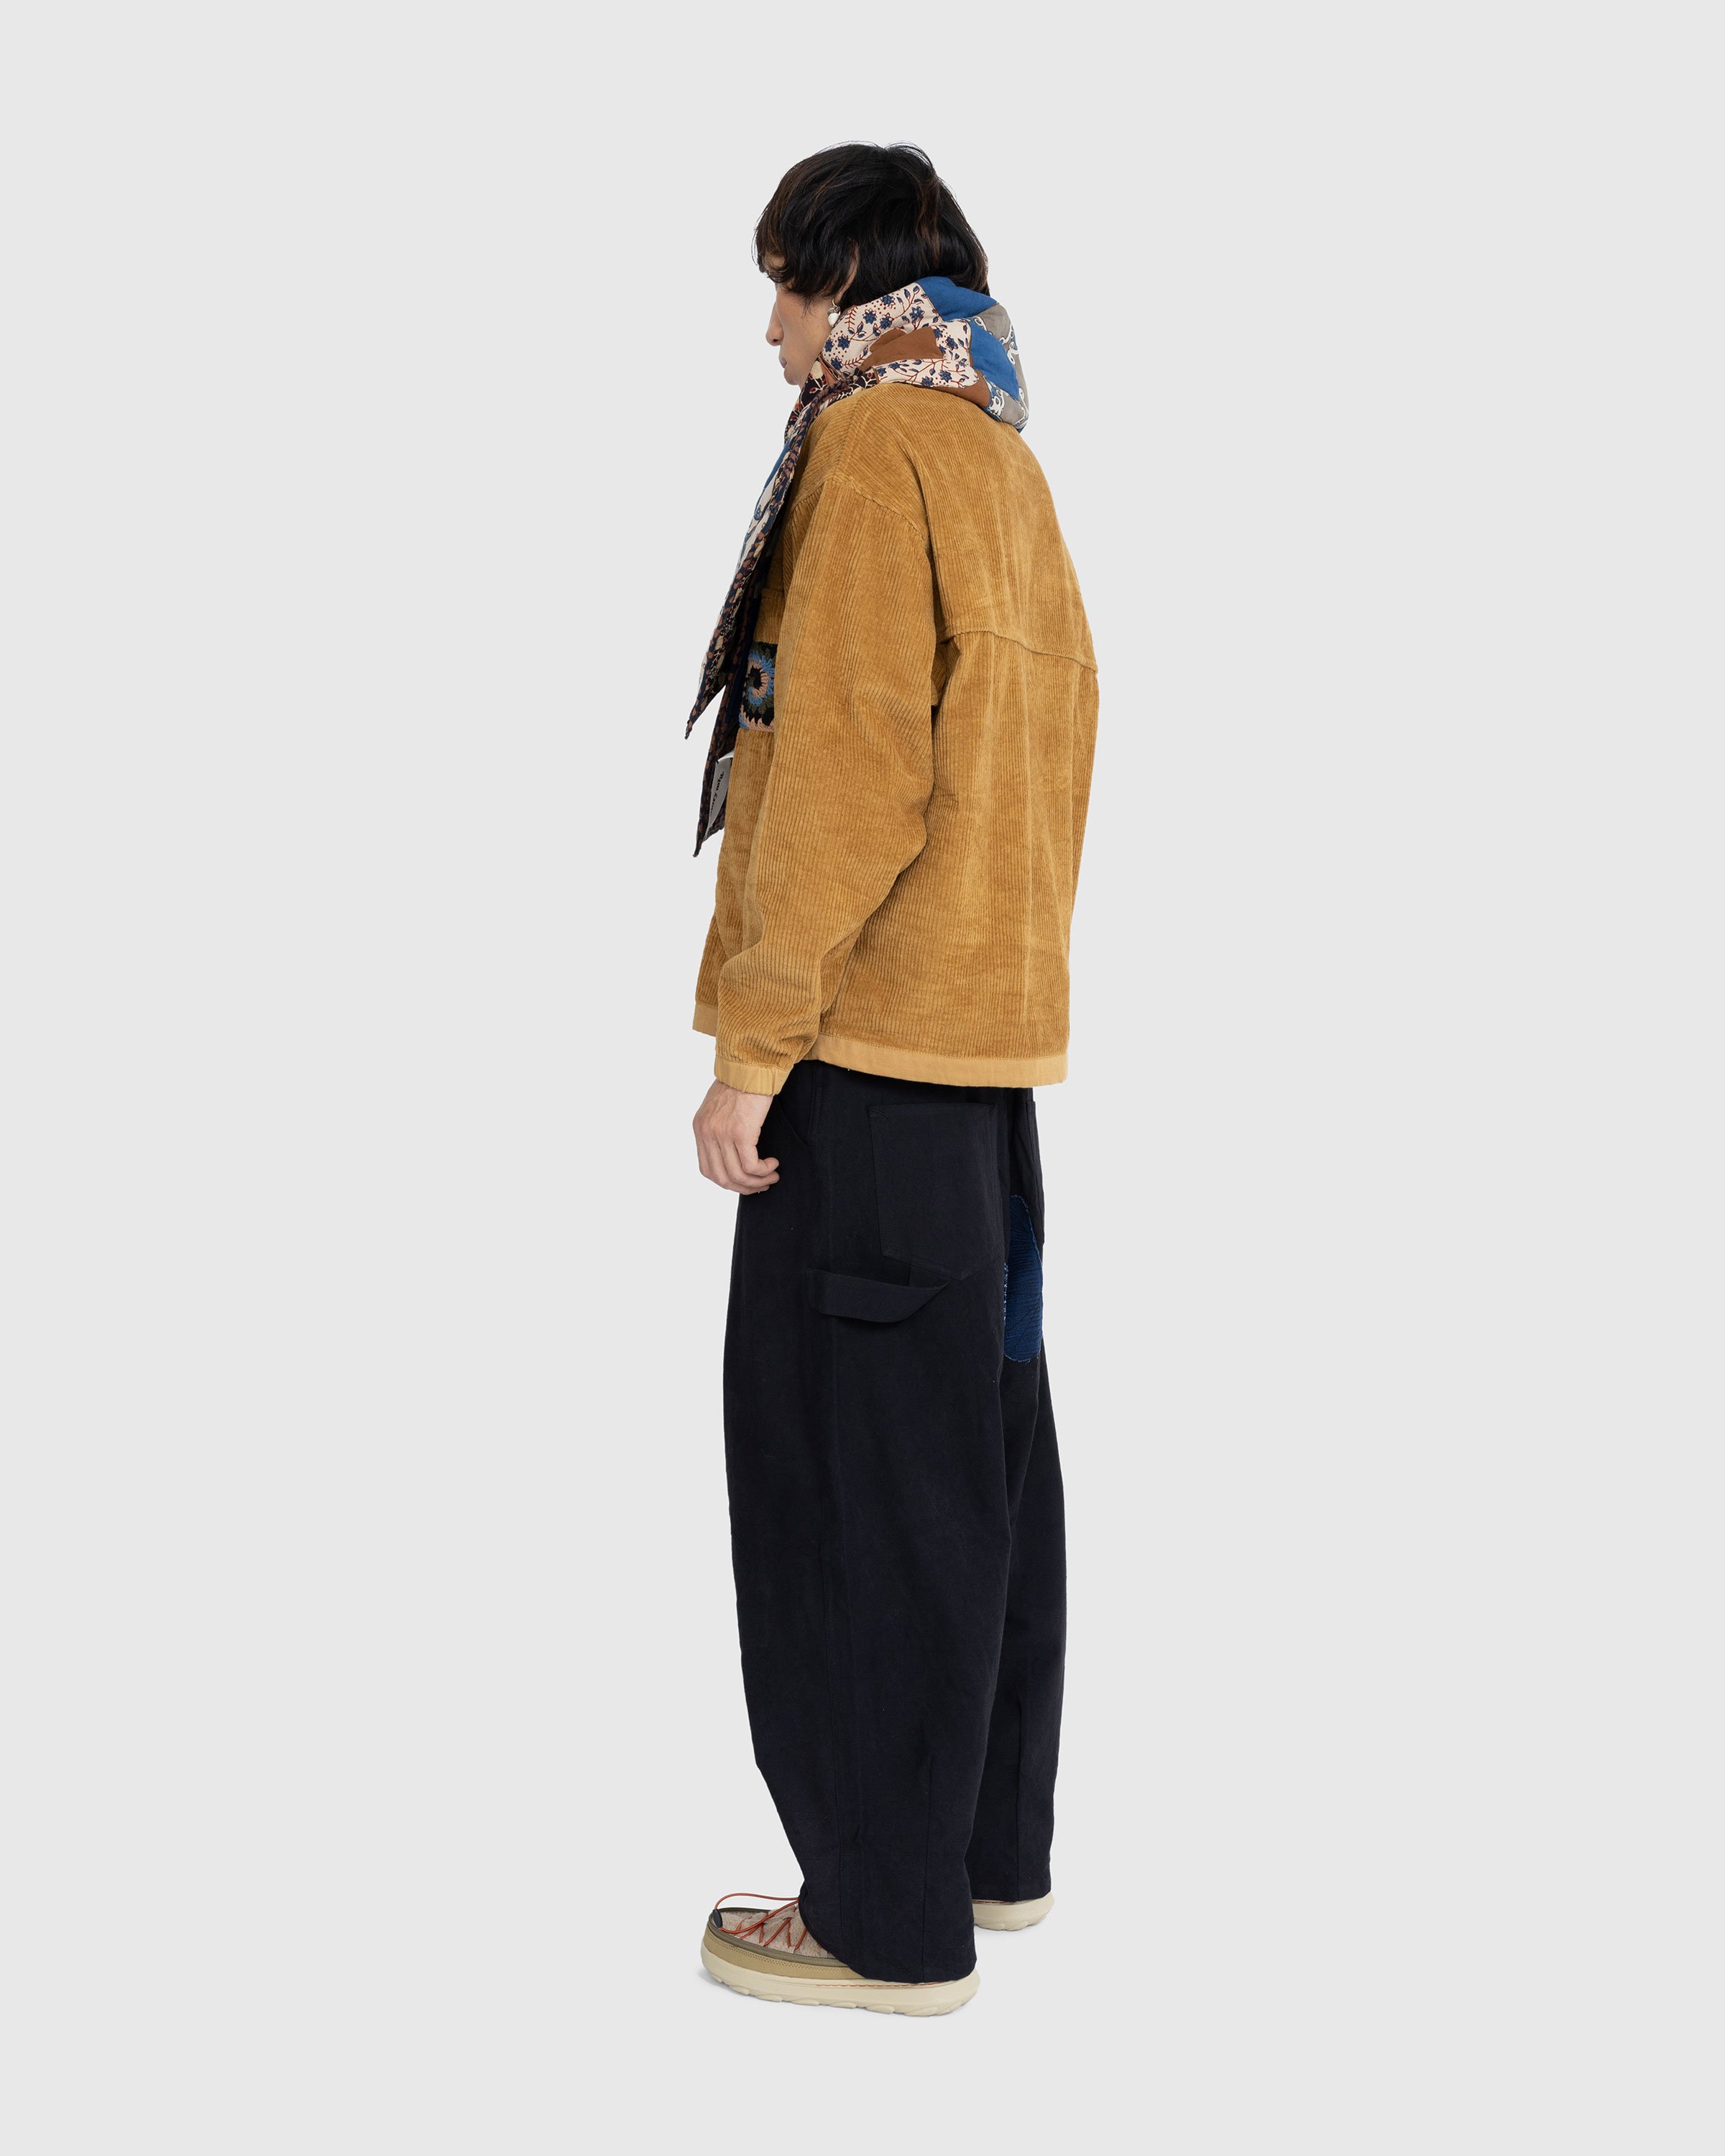 Story mfg. - Patchwork Puffer Scarf Multi - Knits - undefined - Image 5